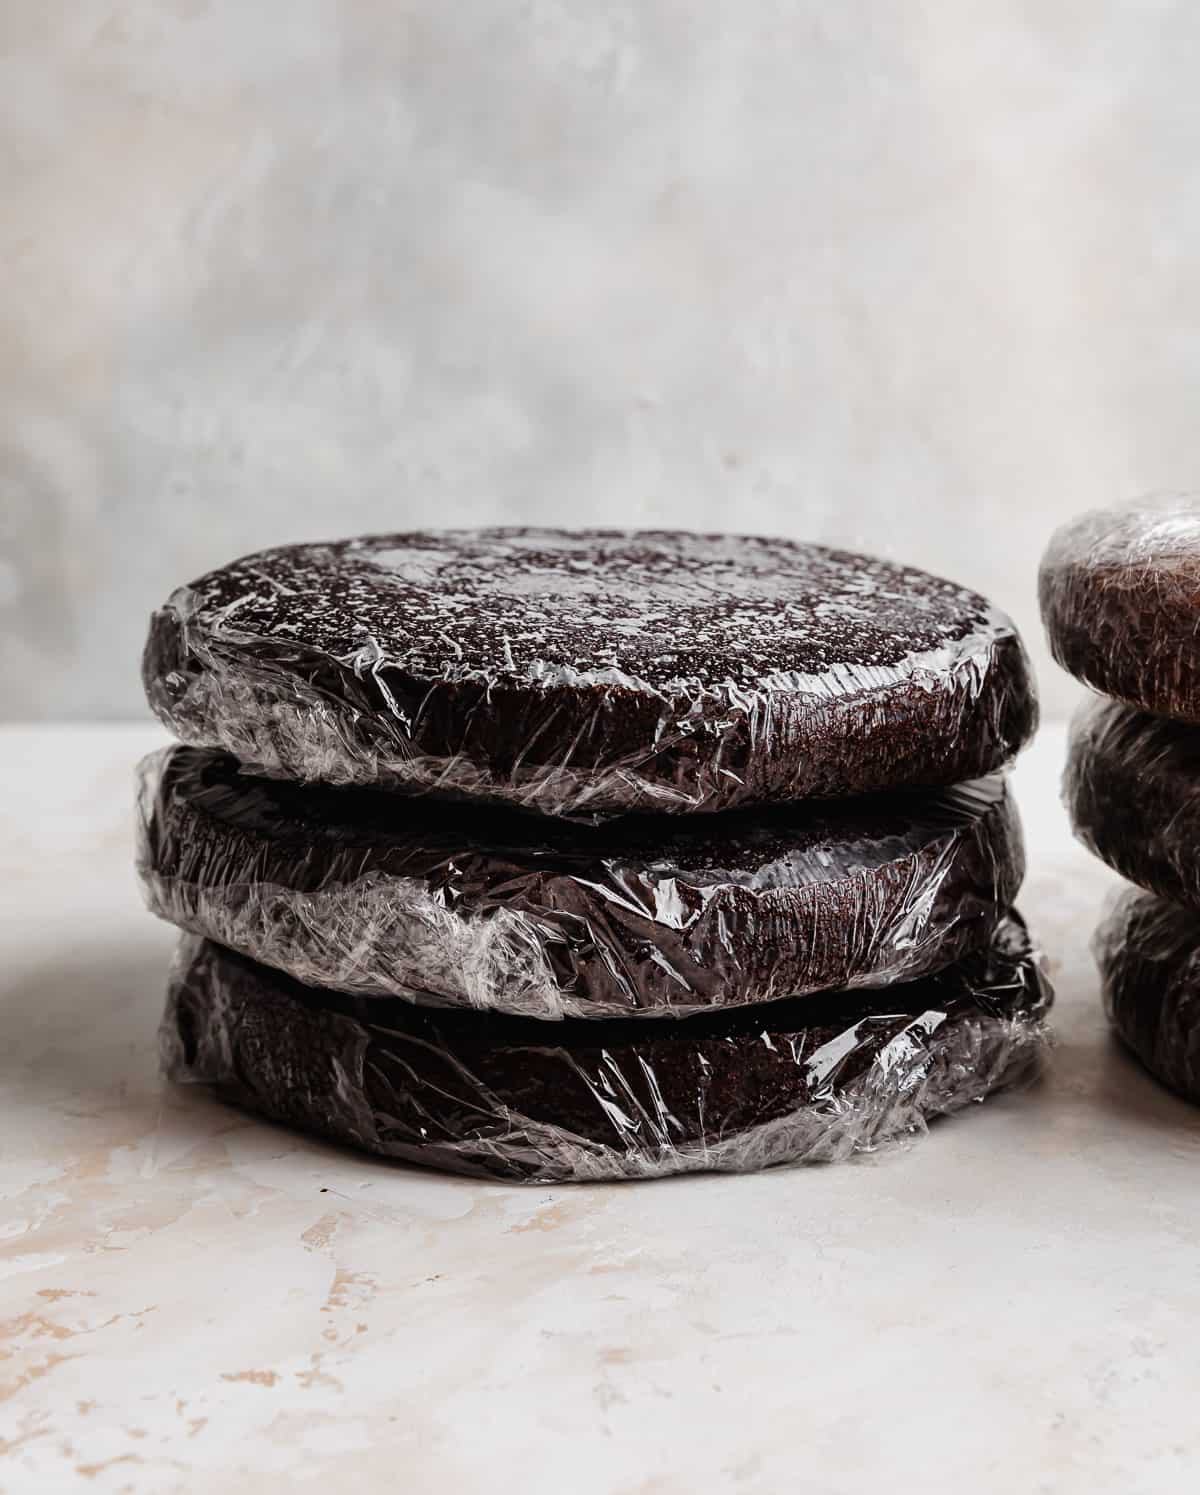 Three baked chocolate cake layers individually wrapped in plastic wrap, stacked on top of each other. 